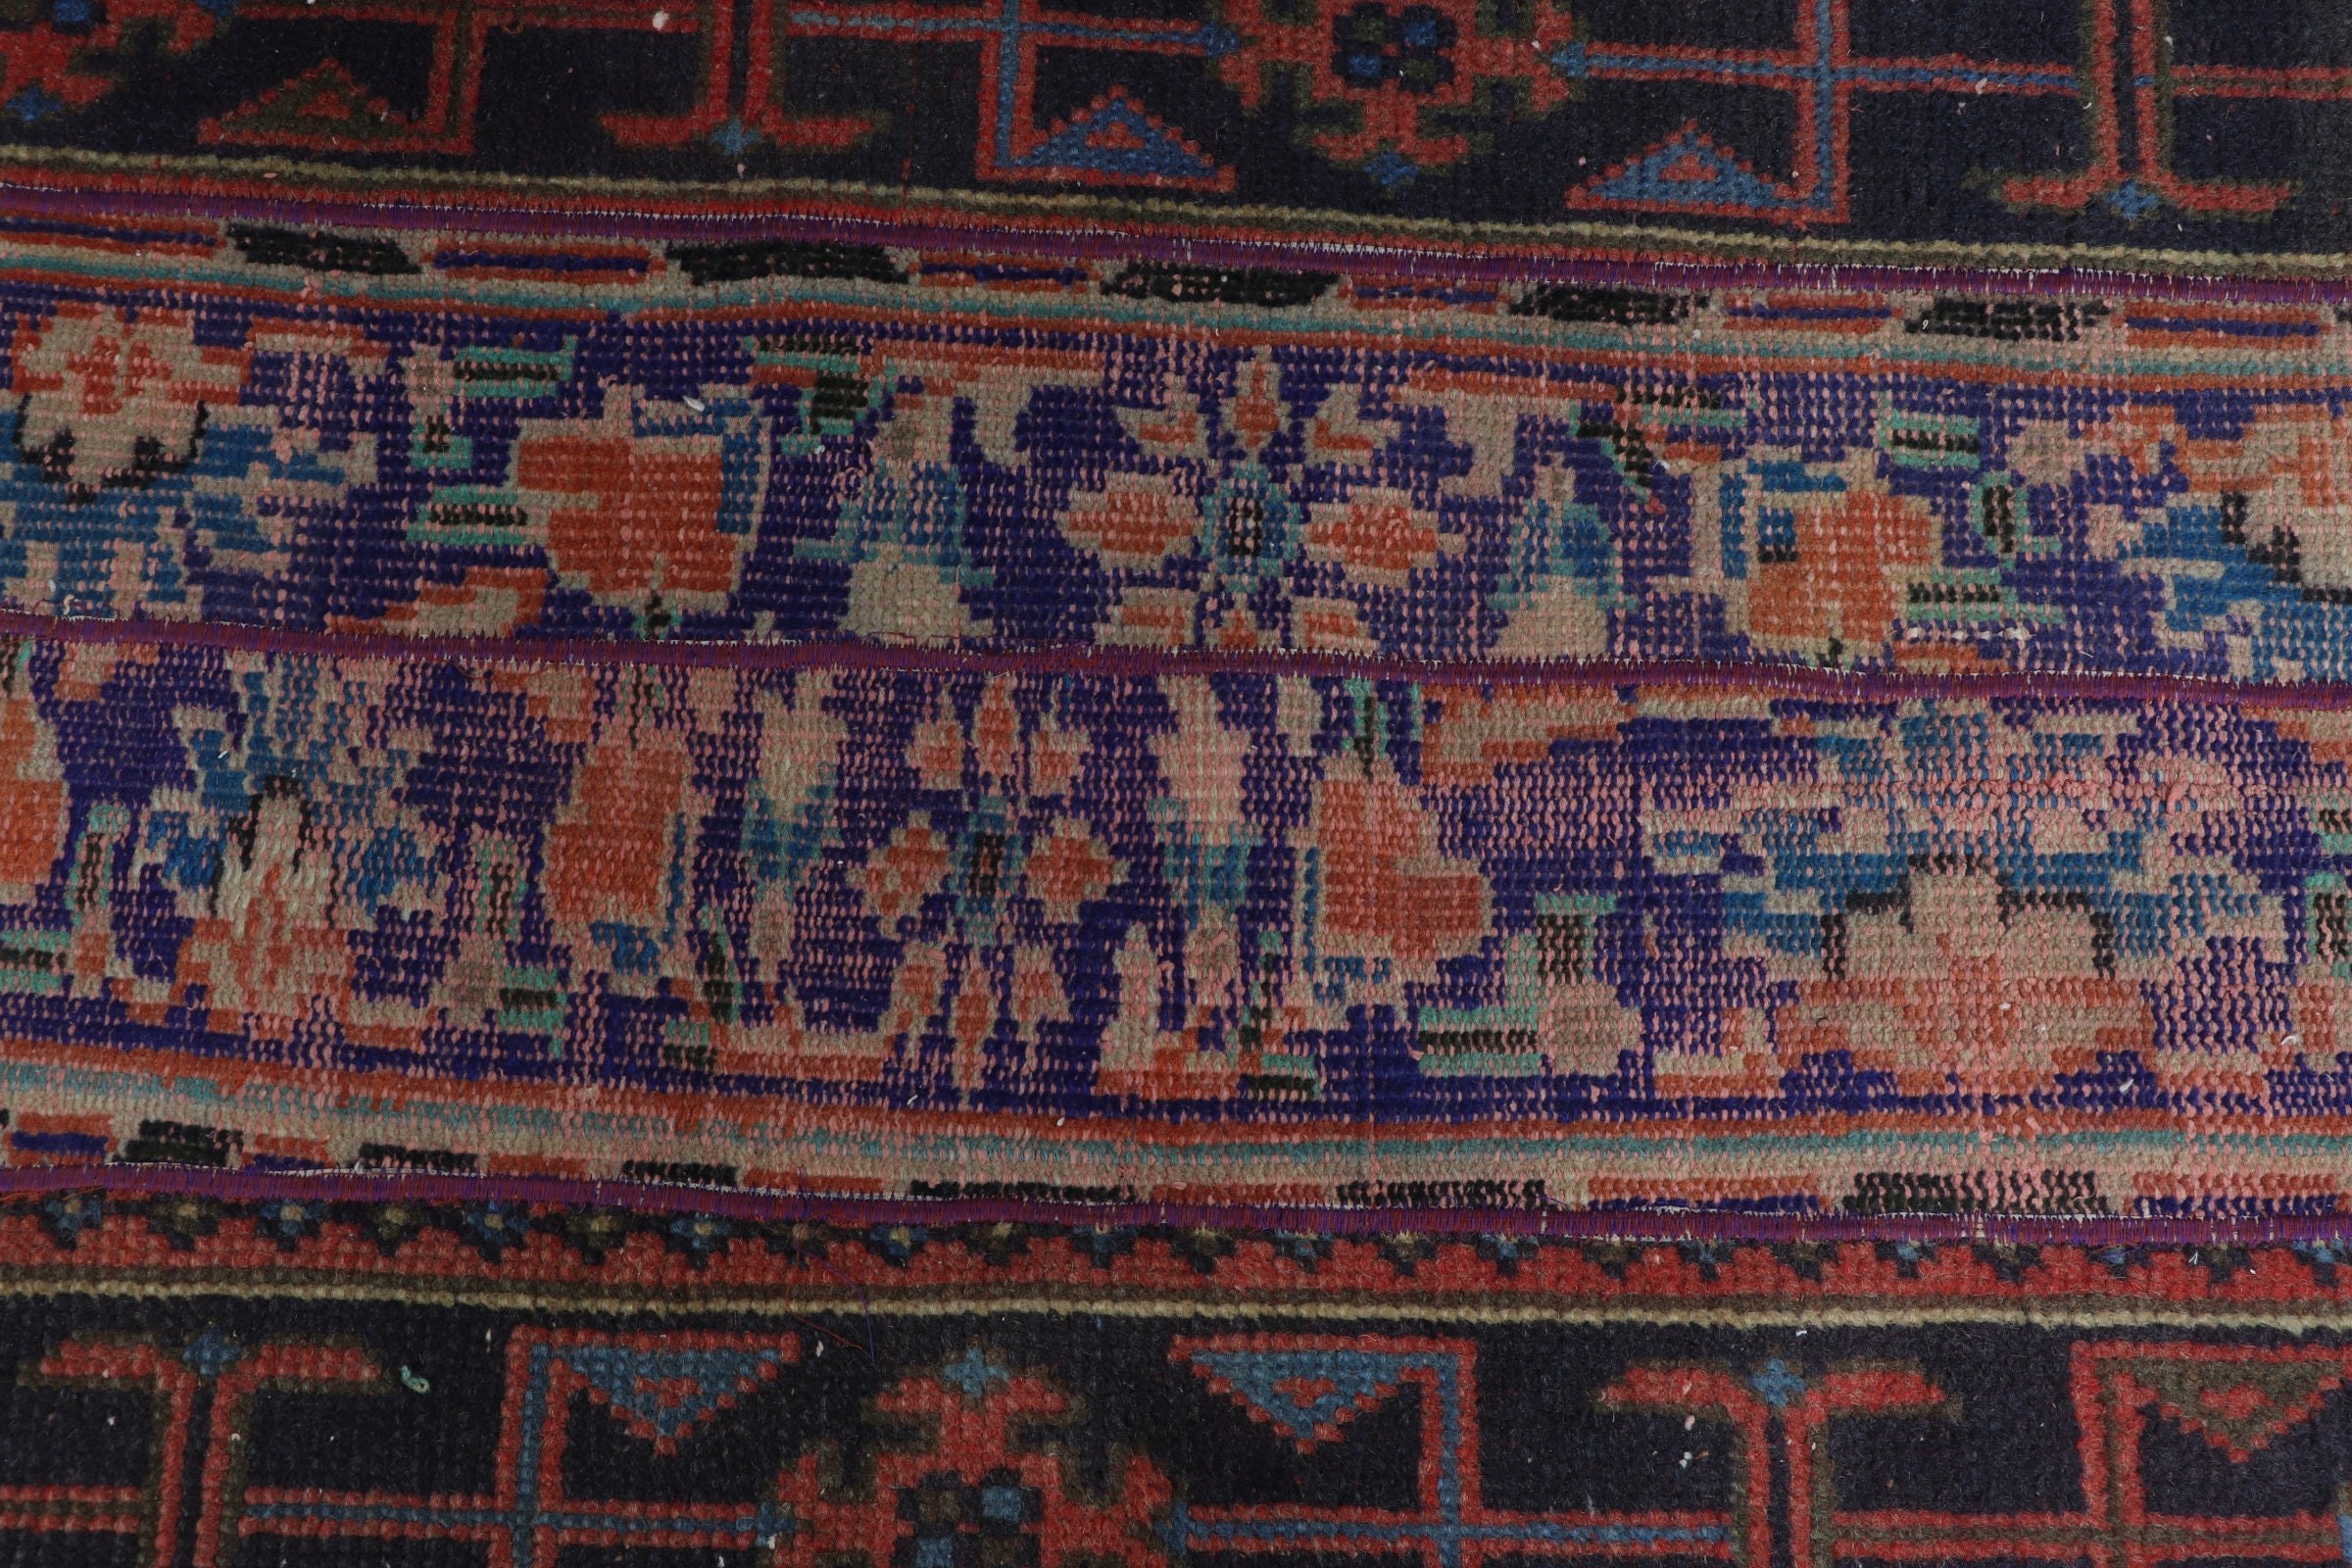 Wall Hanging Rugs, Turkish Rugs, Muted Rug, Cool Rug, Vintage Rugs, Antique Rugs, 2.5x3.2 ft Small Rugs, Orange Home Decor Rug, Car Mat Rug